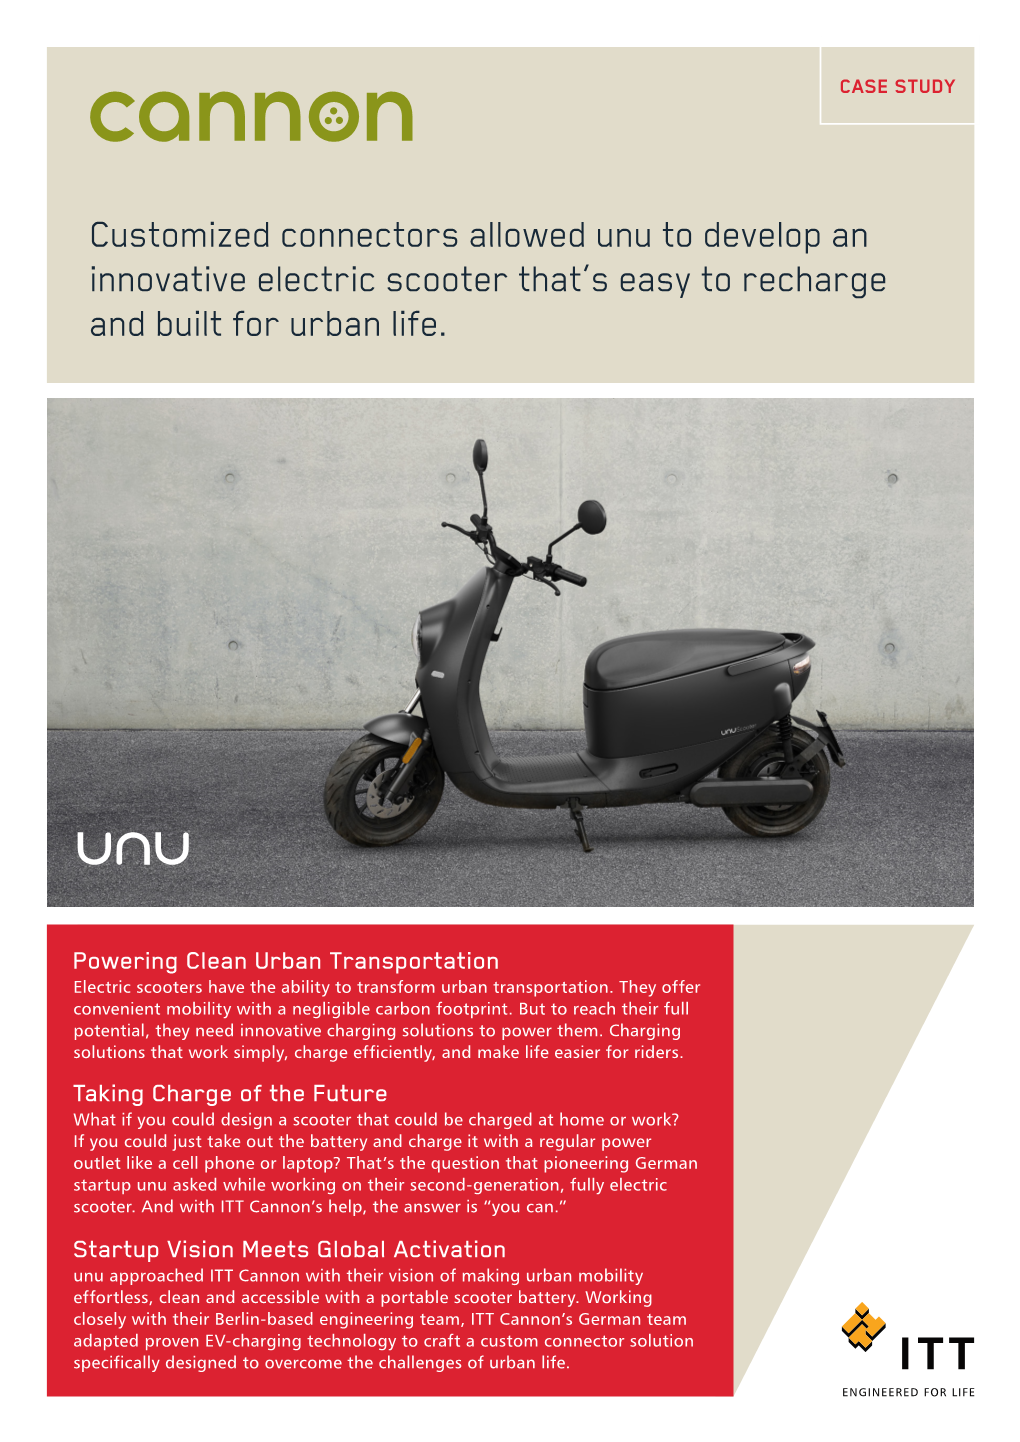 Customized Connectors Allowed Unu to Develop an Innovative Electric Scooter That’S Easy to Recharge and Built for Urban Life